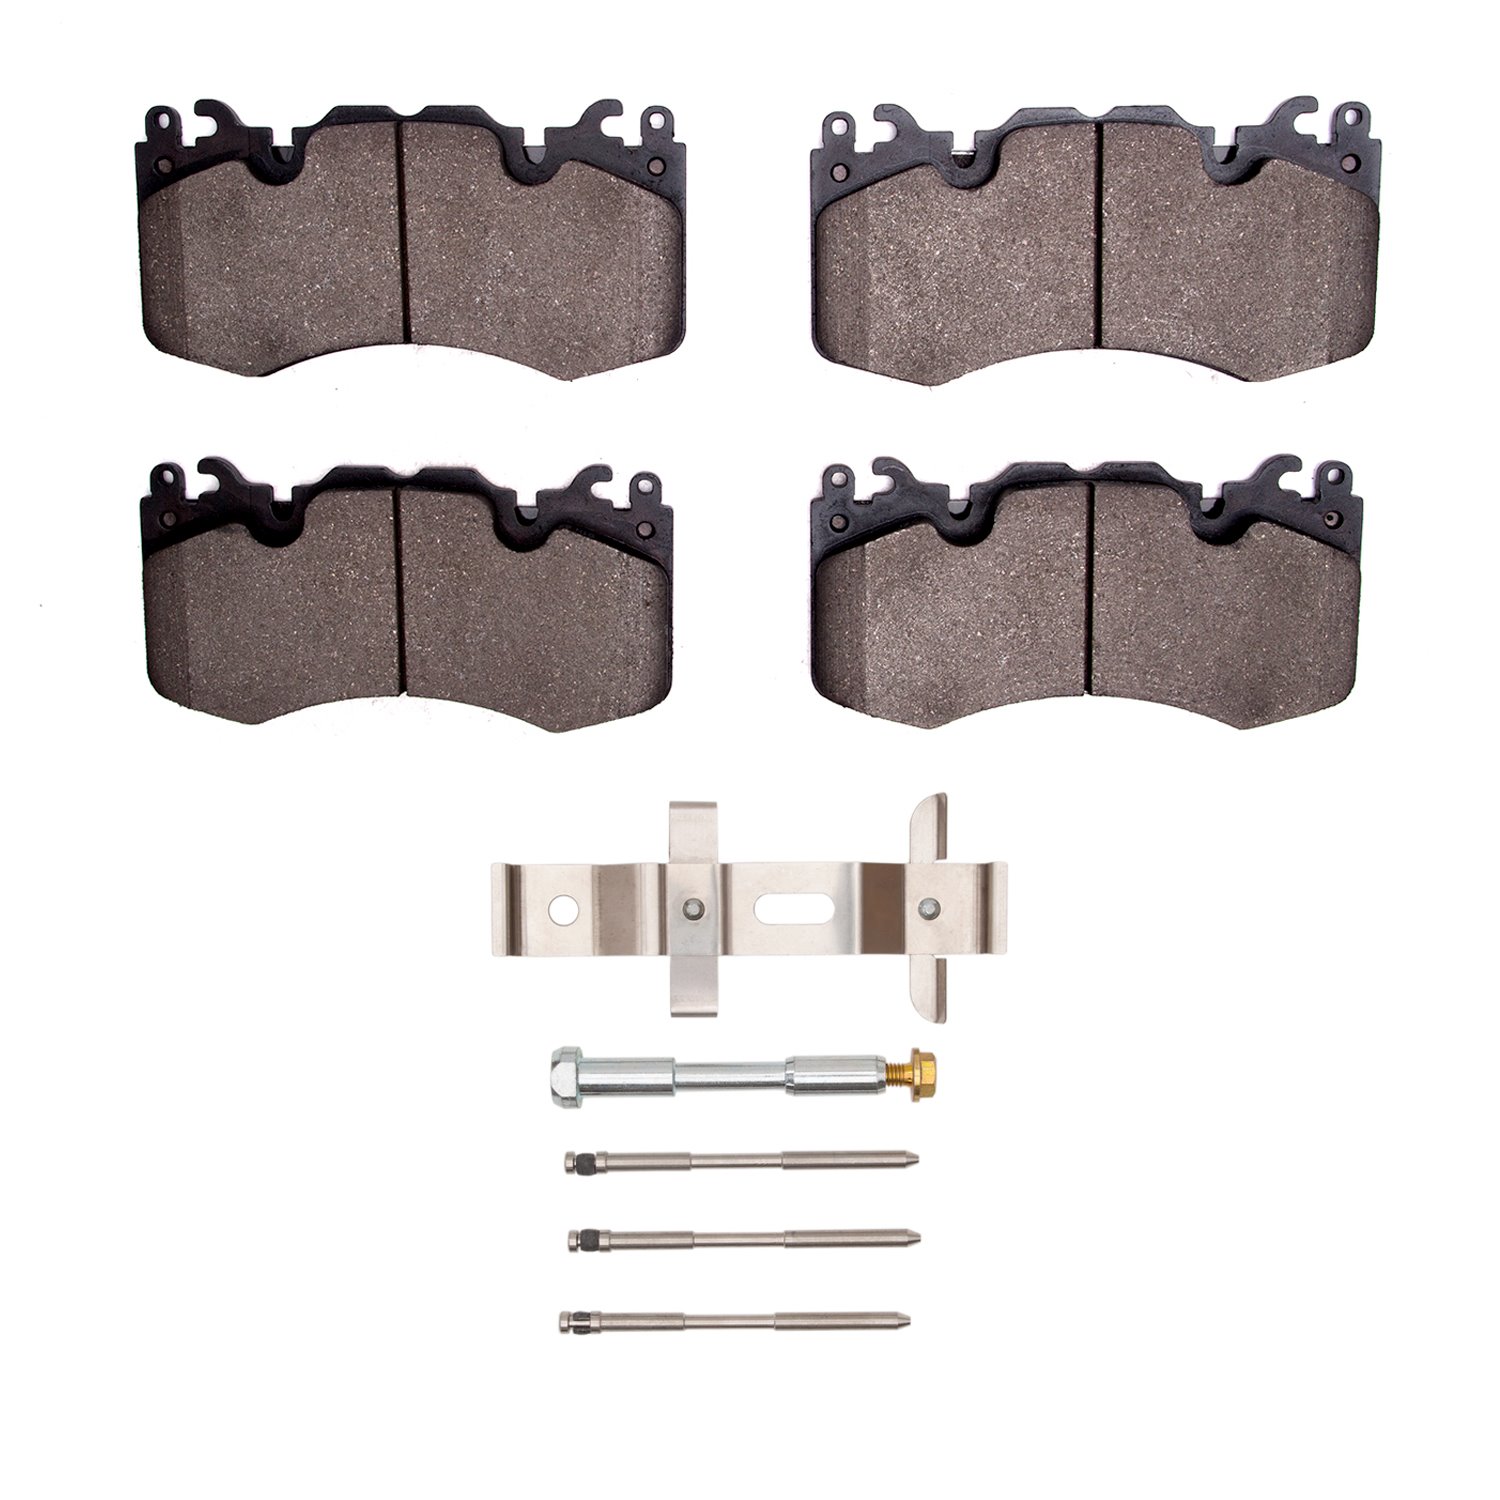 1310-1426-01 3000-Series Ceramic Brake Pads & Hardware Kit, Fits Select Land Rover, Position: Front